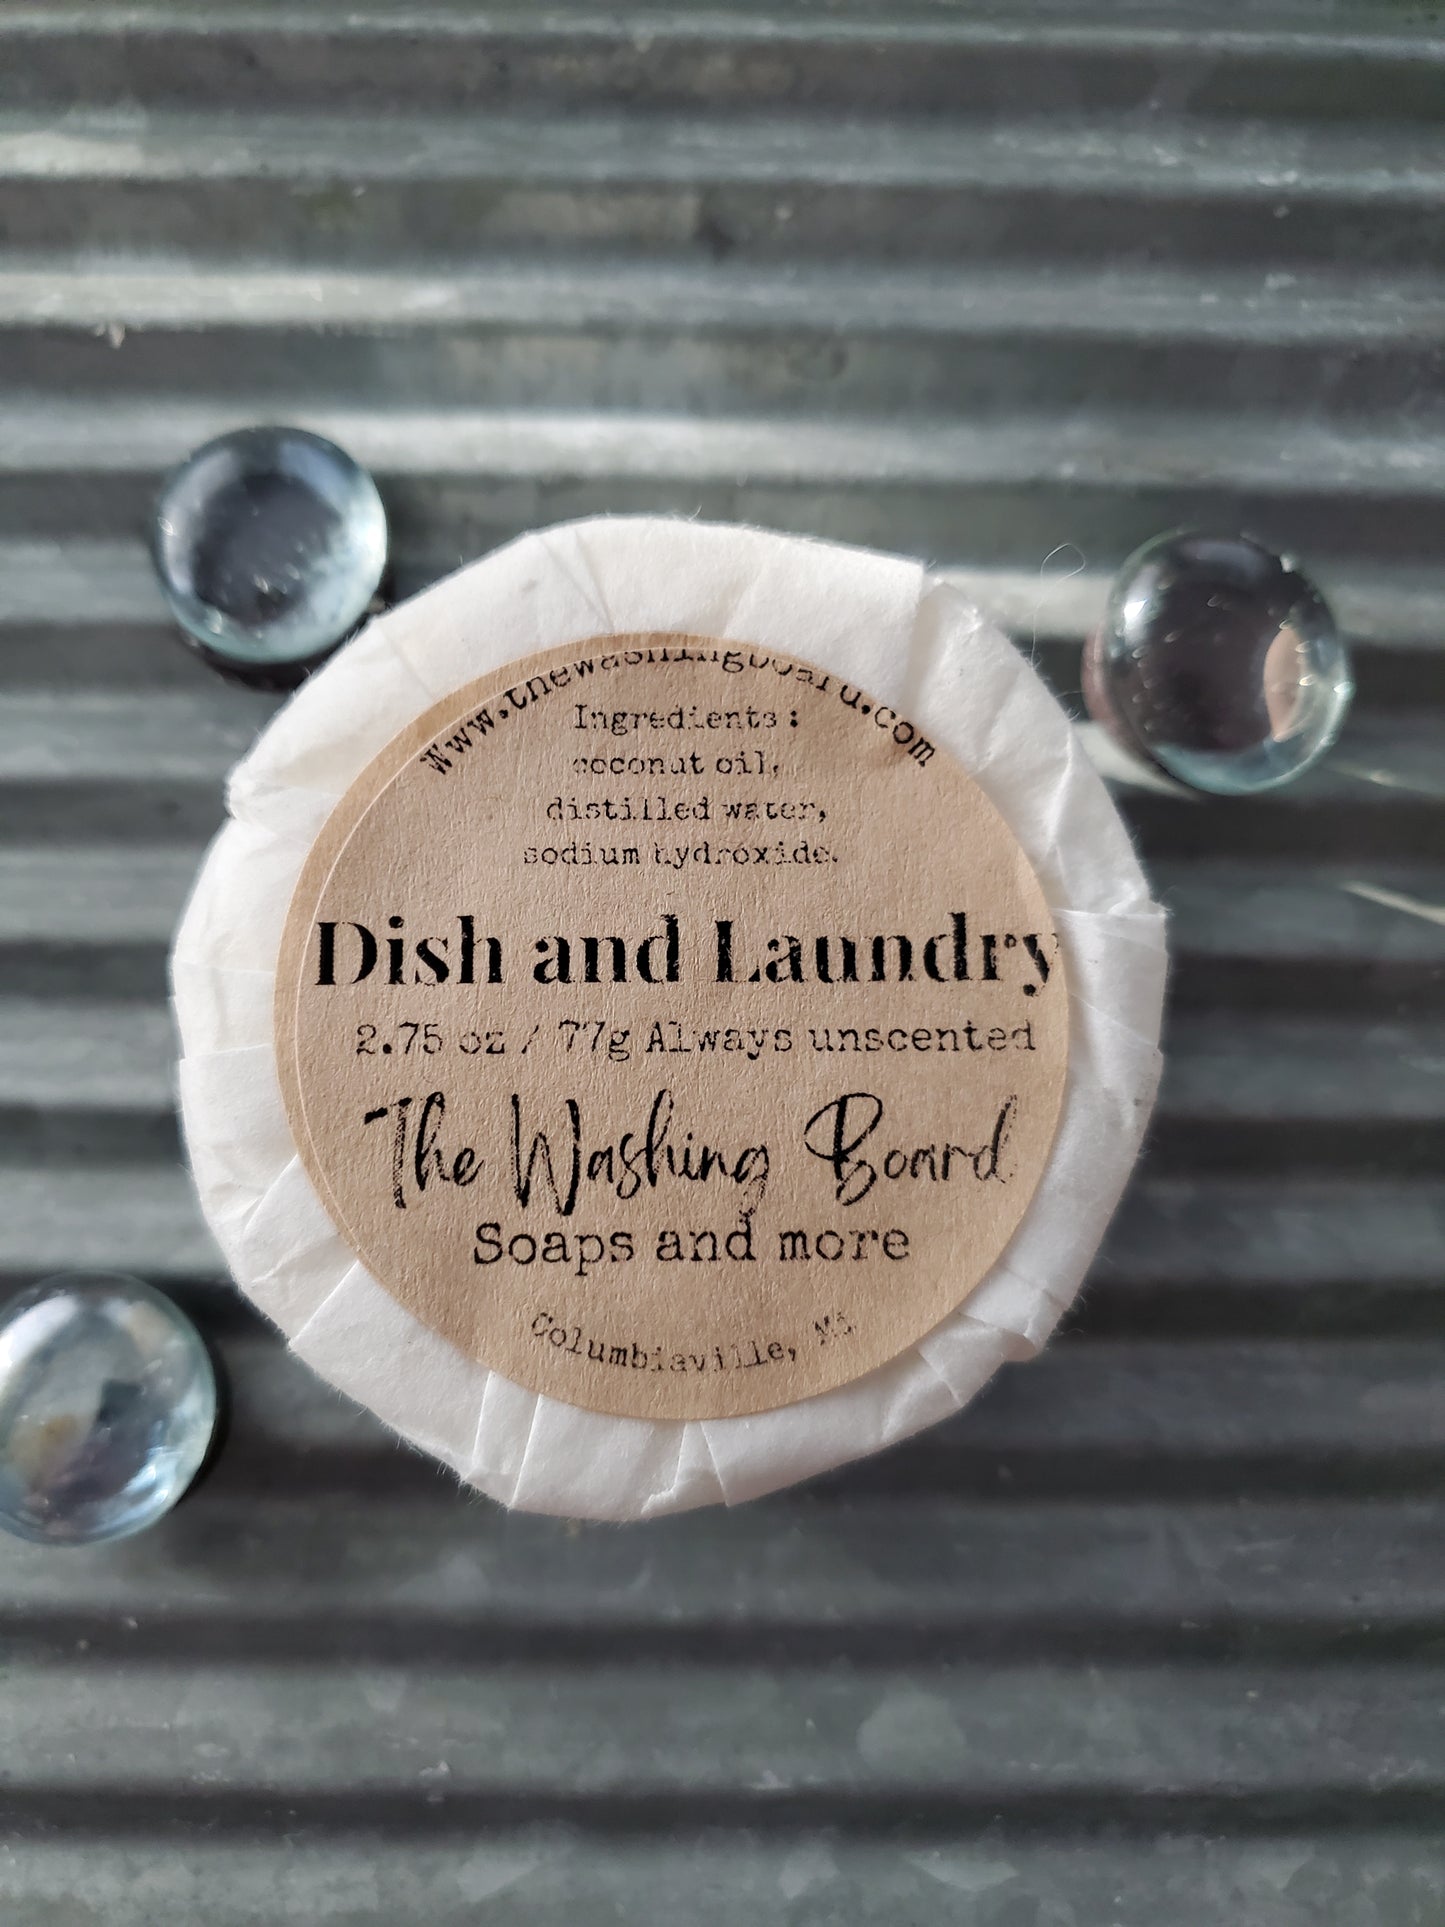 Dish and Laundry